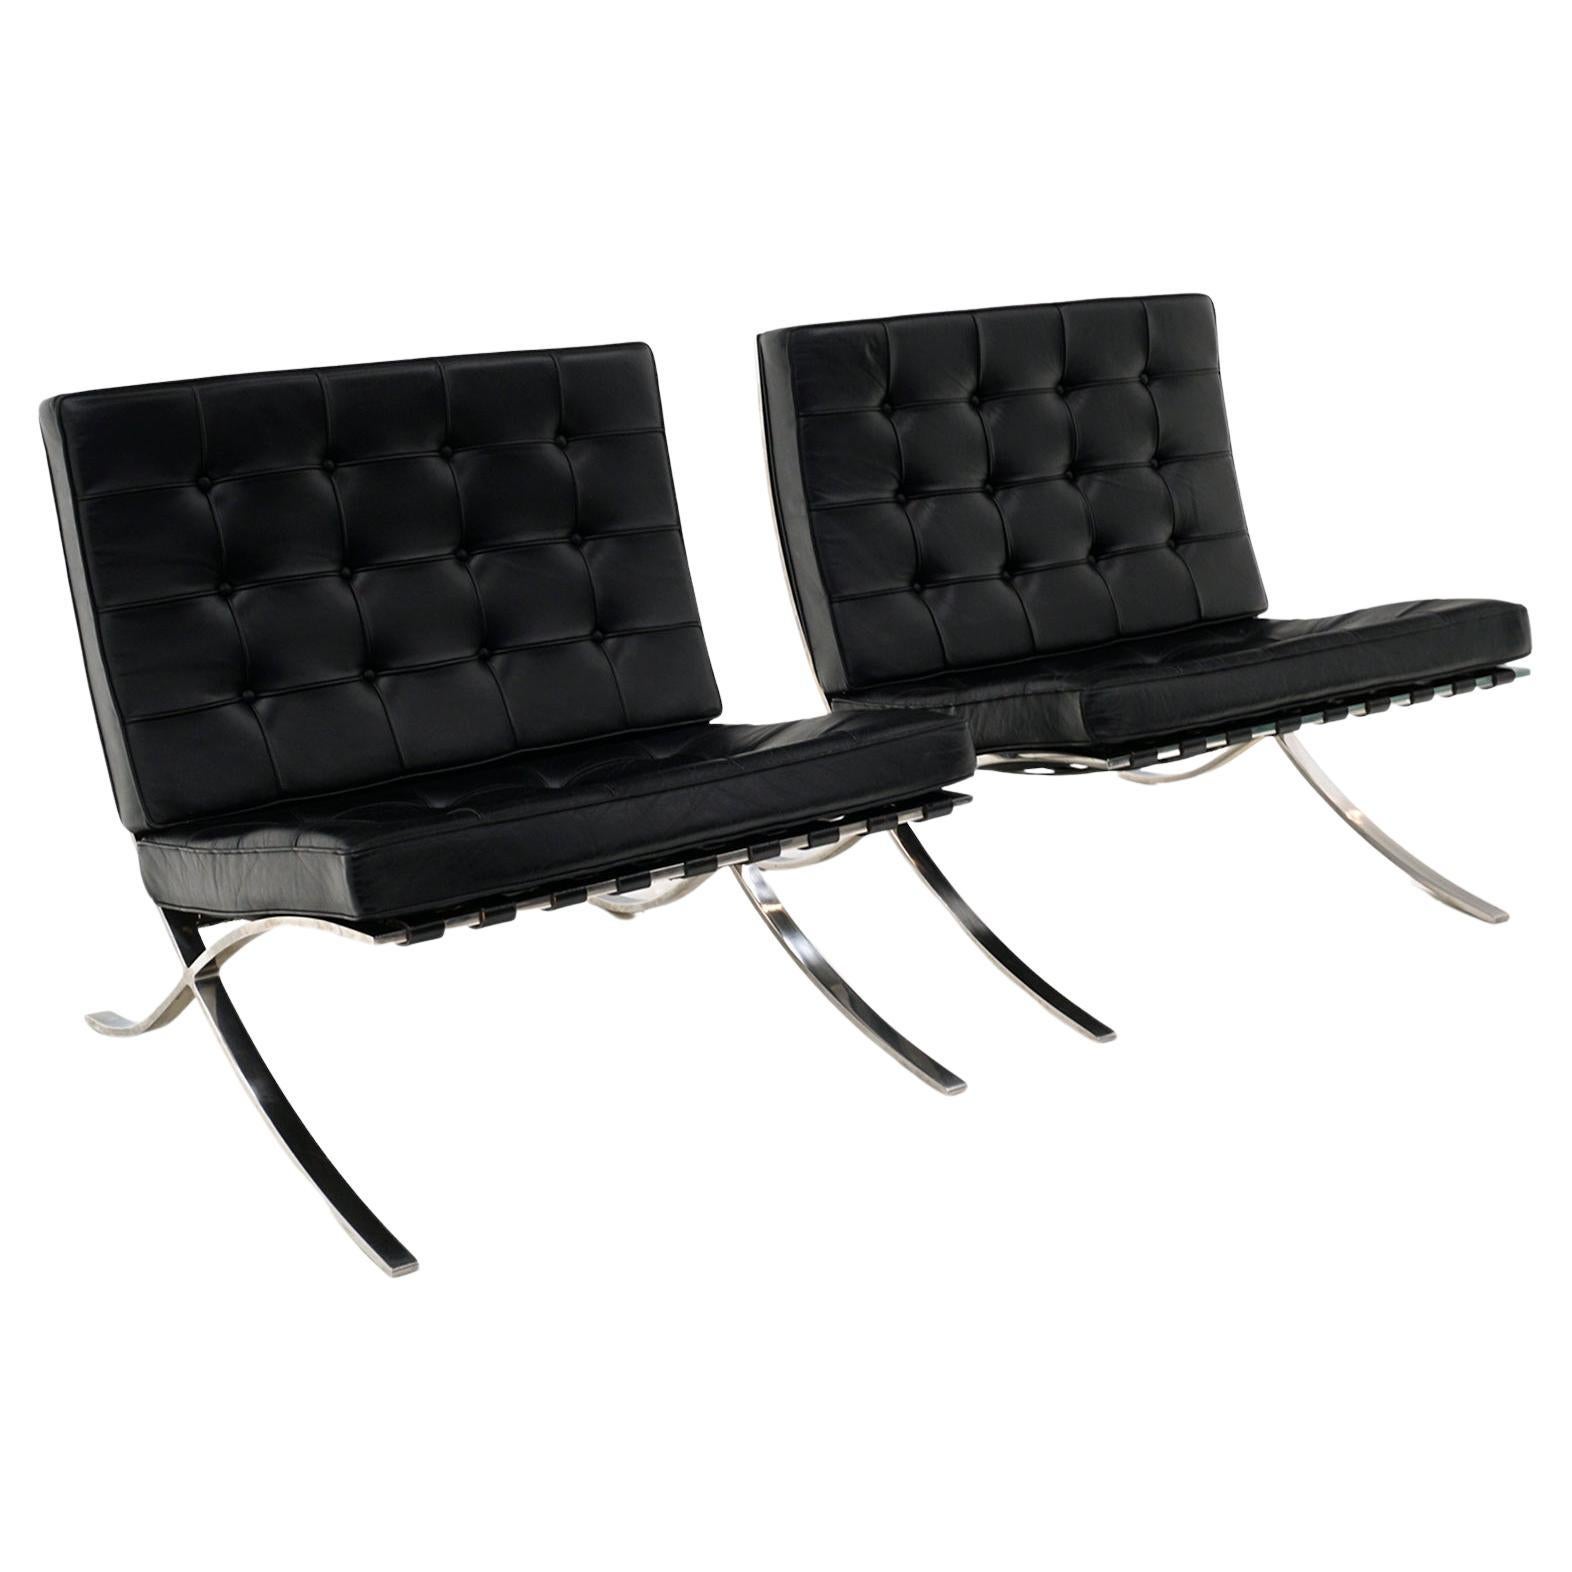 Pair Barcelona Chairs, Black Leather and Stainless Steel, Mies for Knoll, Signed For Sale